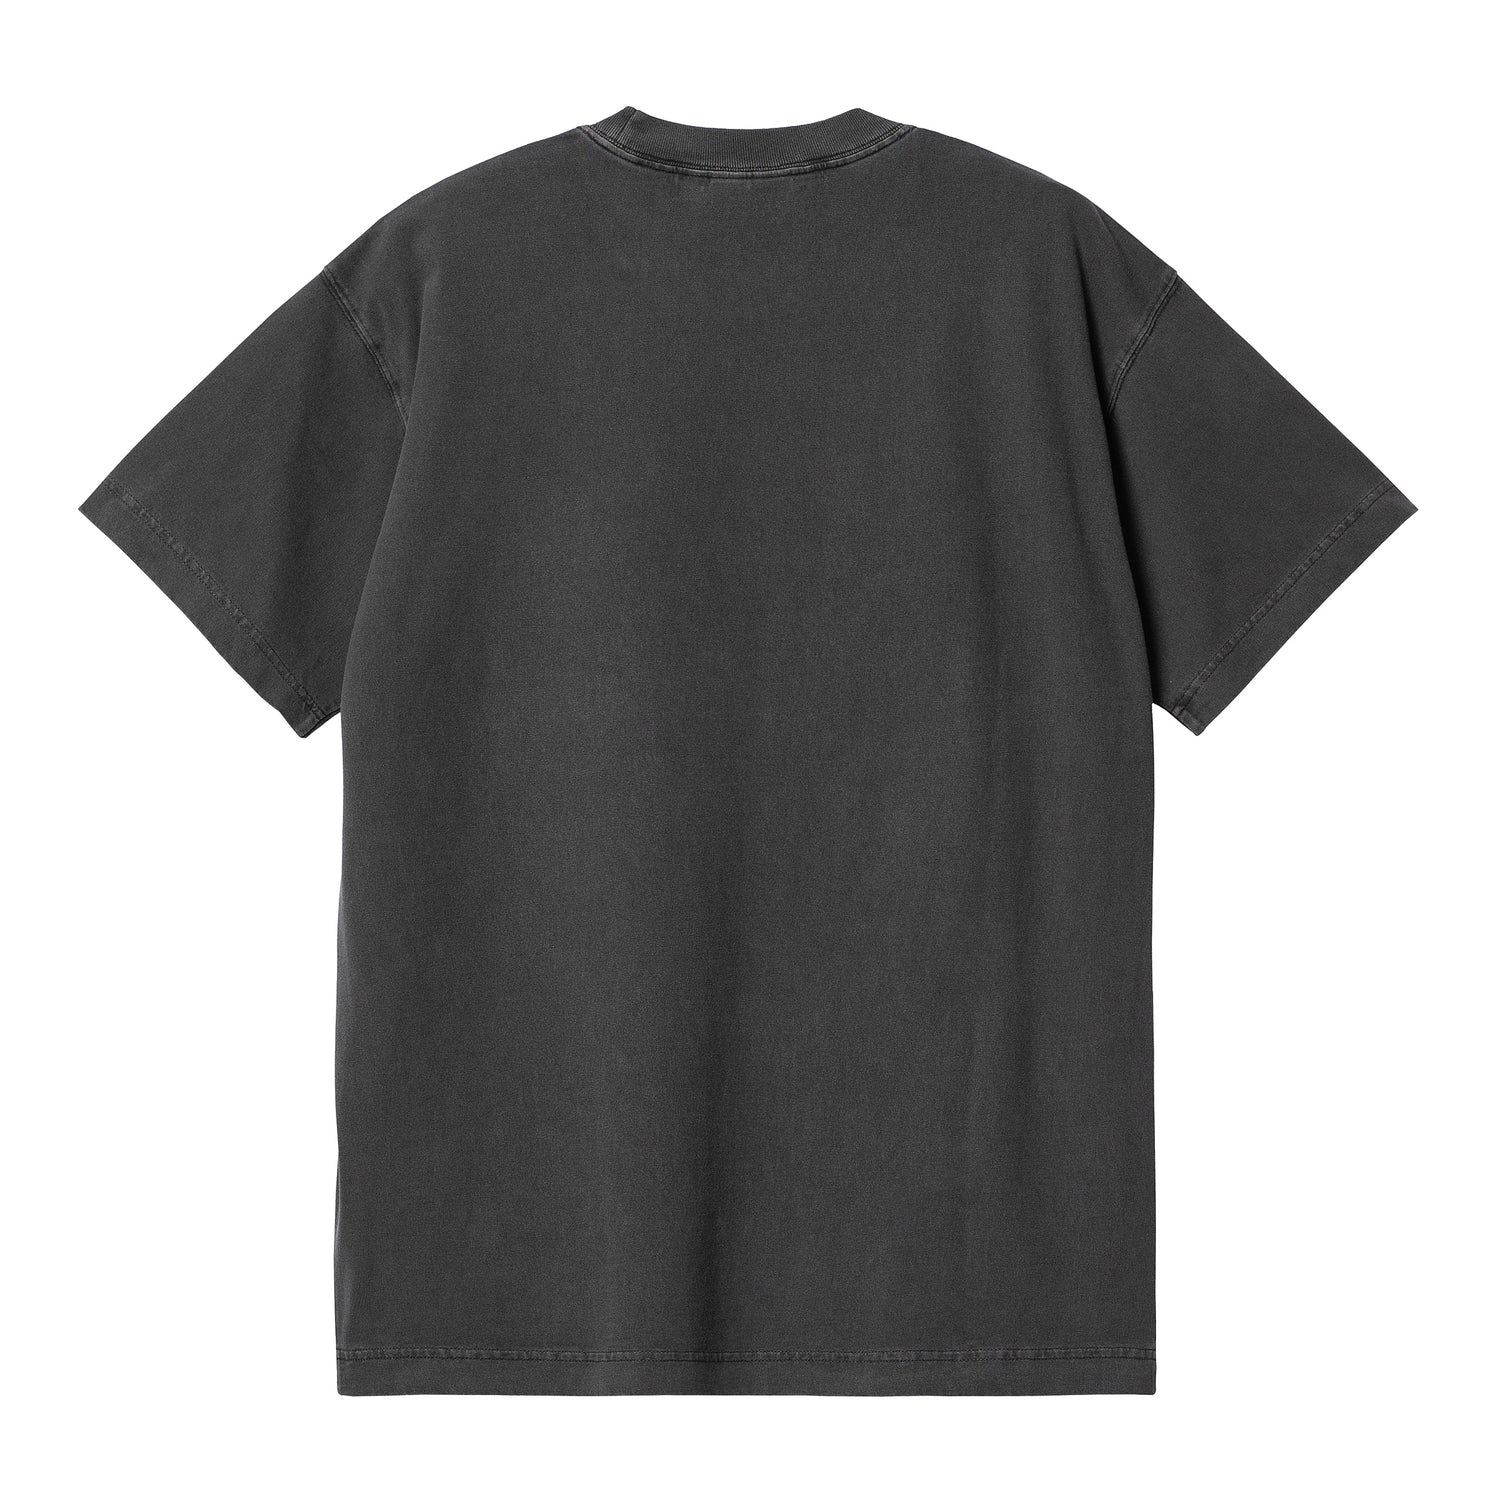 S/S NELSON T-SHIRT CHARCOAL GARMENT DYED